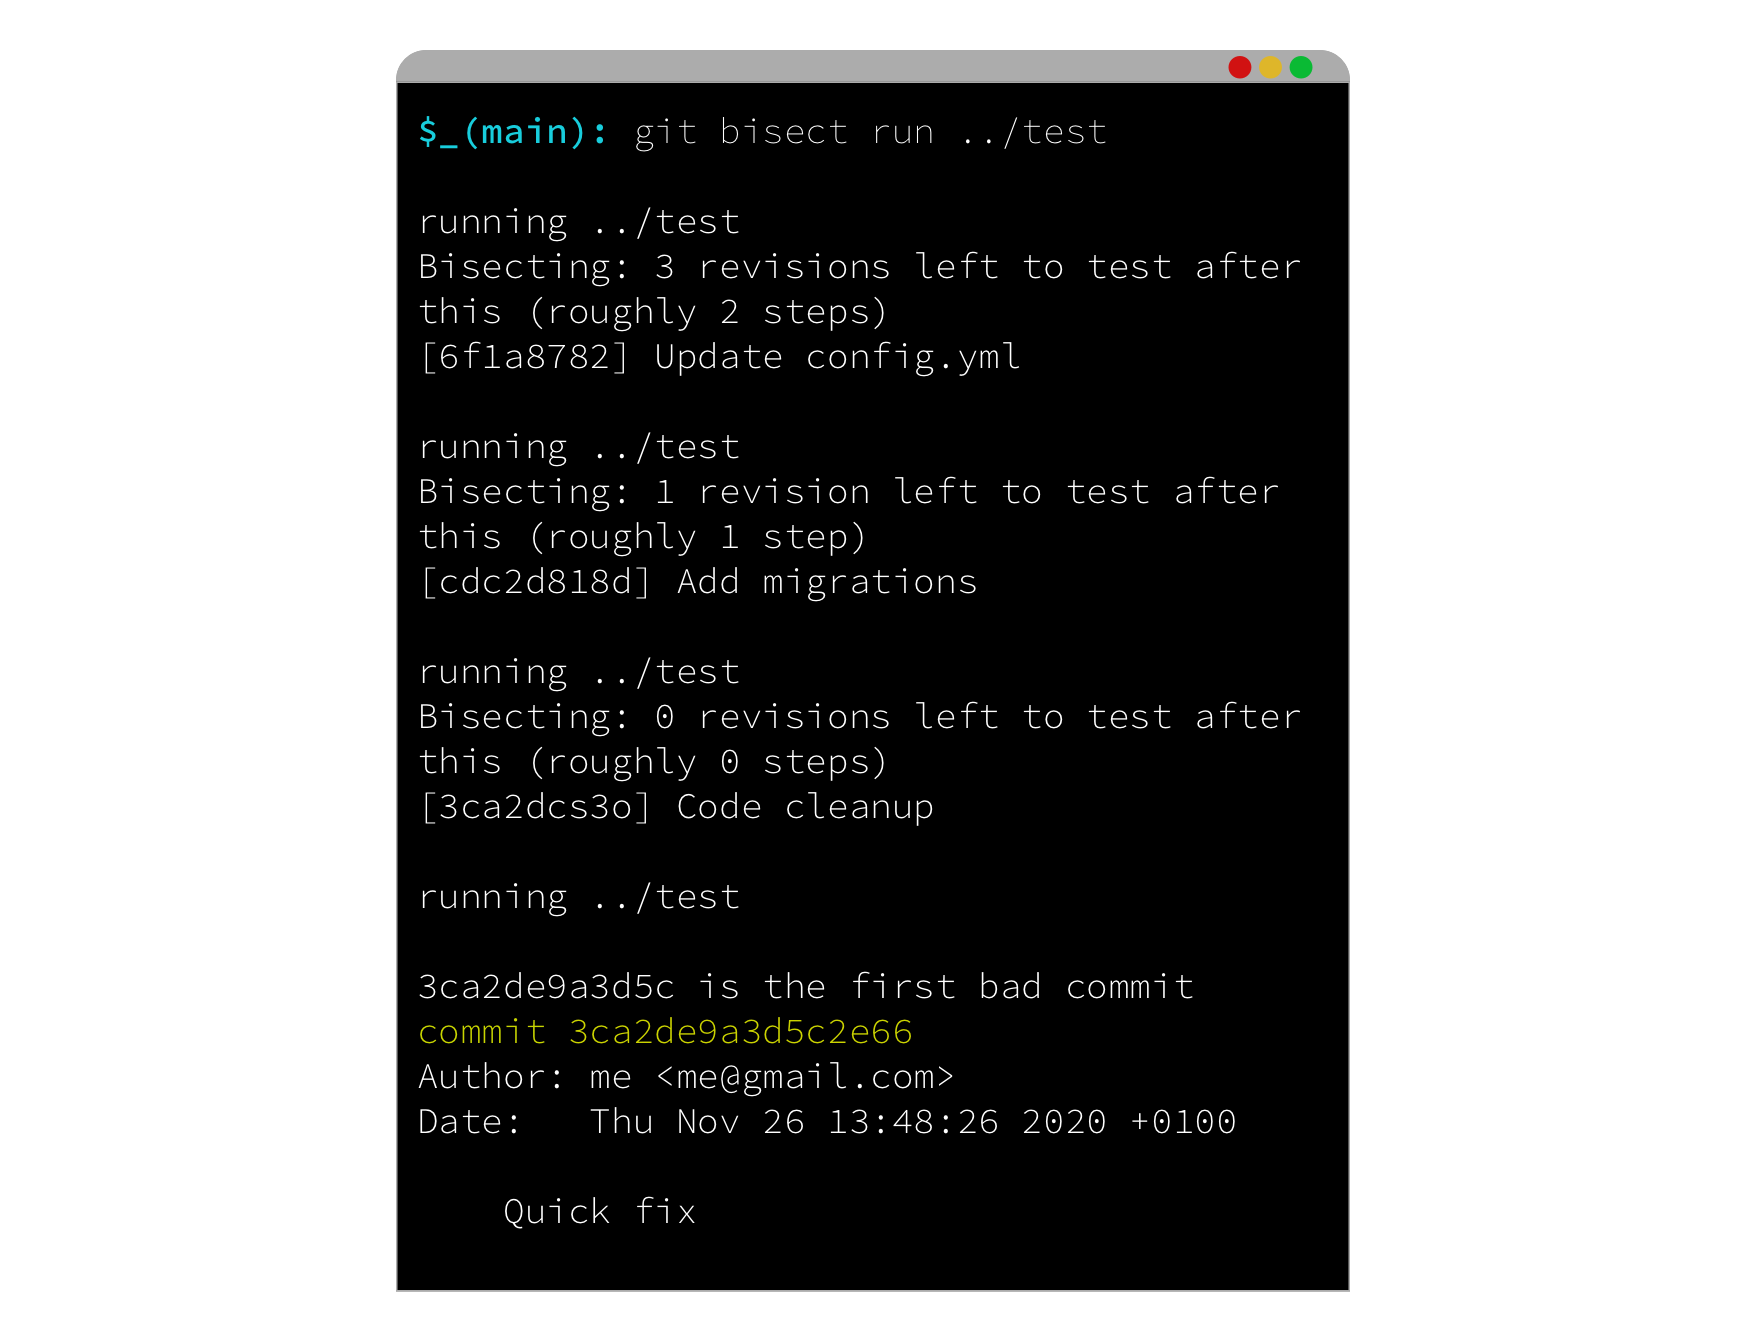 cli_bisect_run_2.png